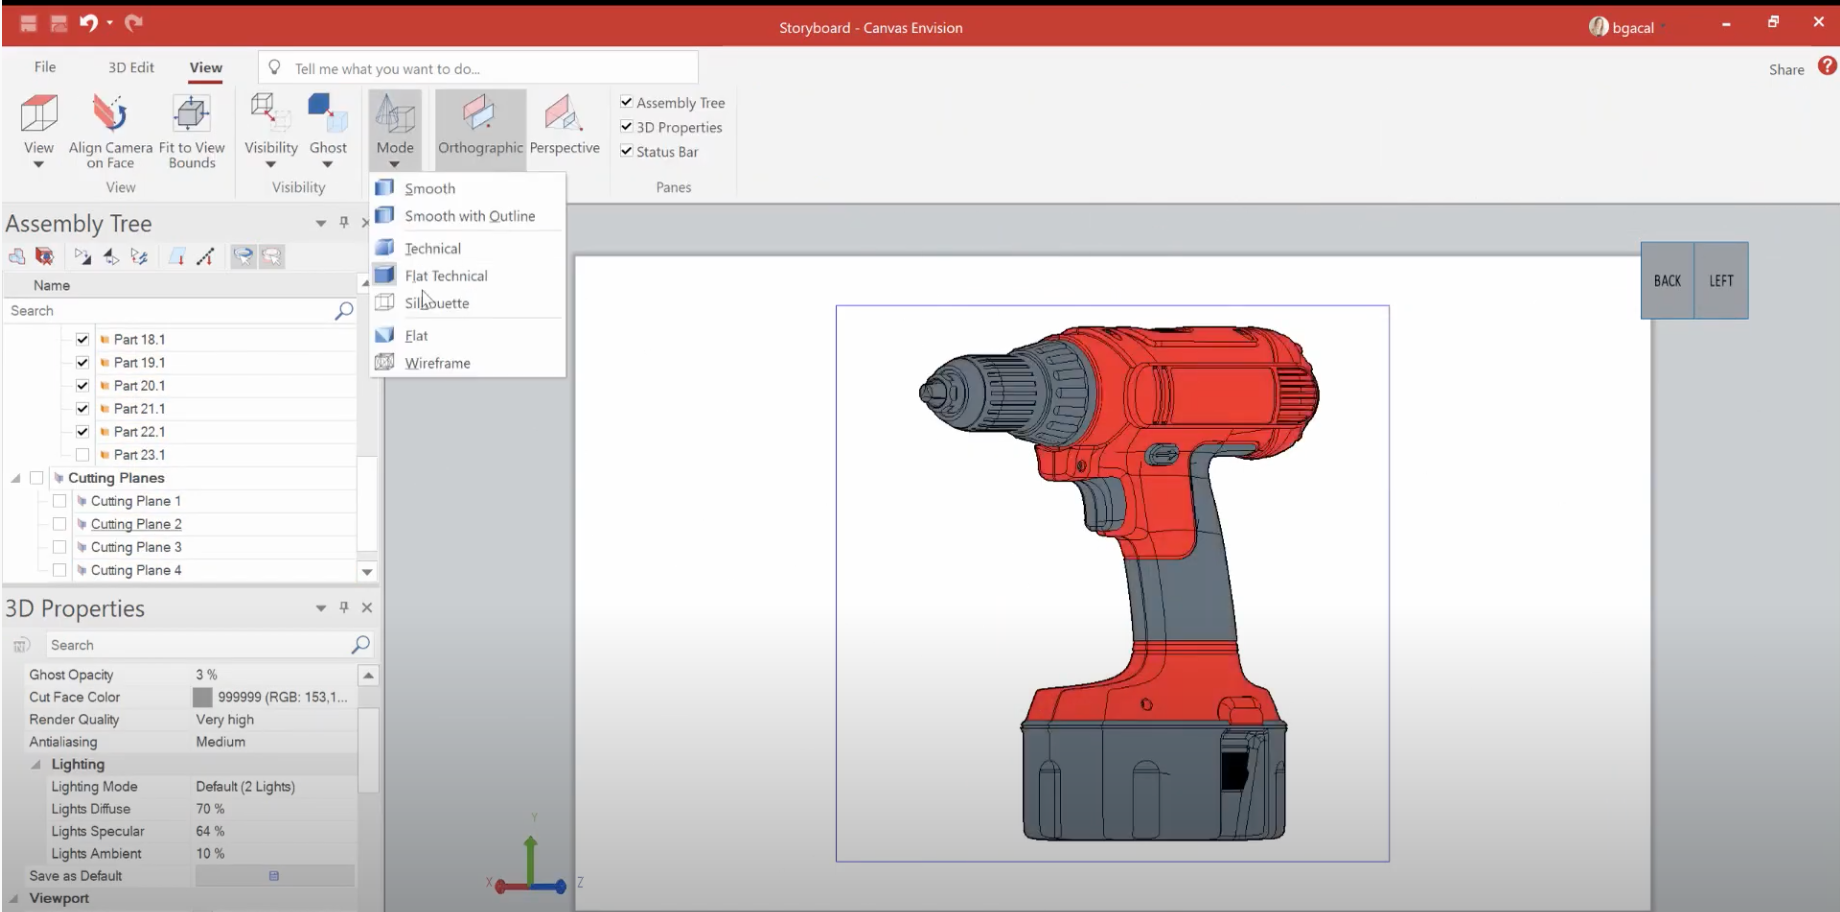 Canvas Envision Software - Envision cuts the time spent creating all kinds of product documentation by giving everyone a simple to use graphics solution which lets them handle 3D CAD like a pro. That’s true autonomy